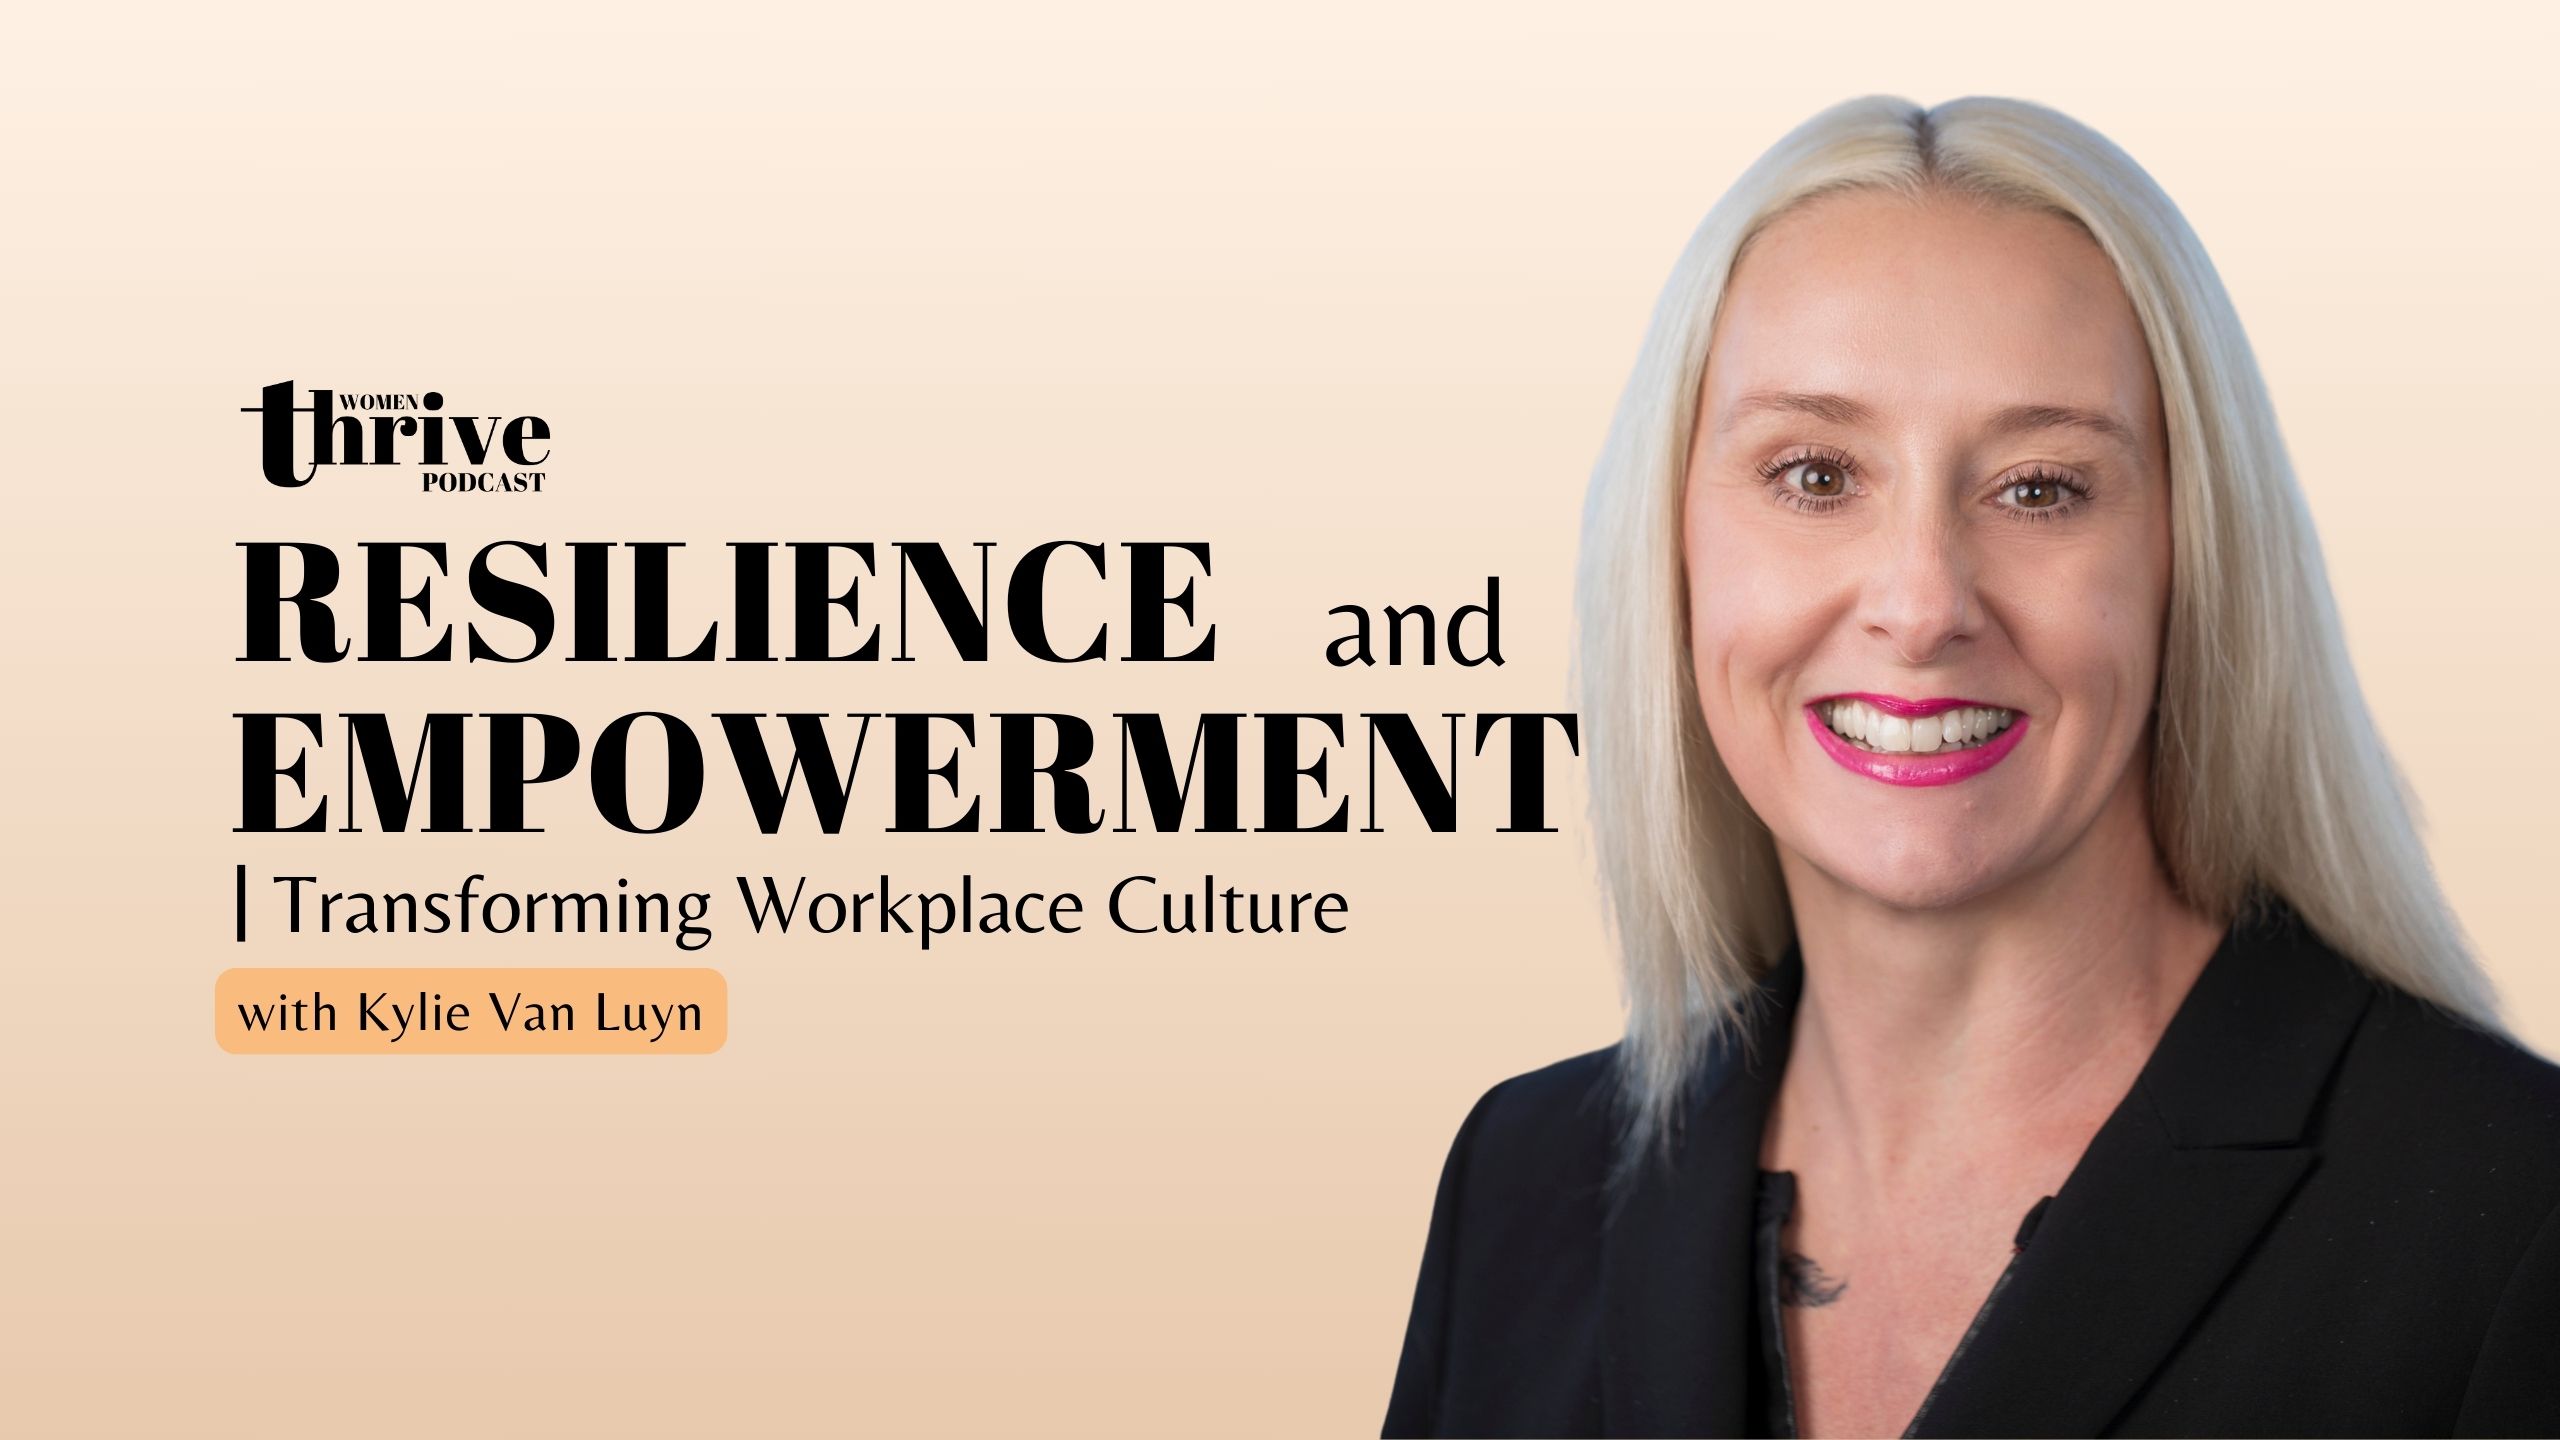 Resilience and Empowerment: Transforming Workplace Culture with Kylie Van Luyn